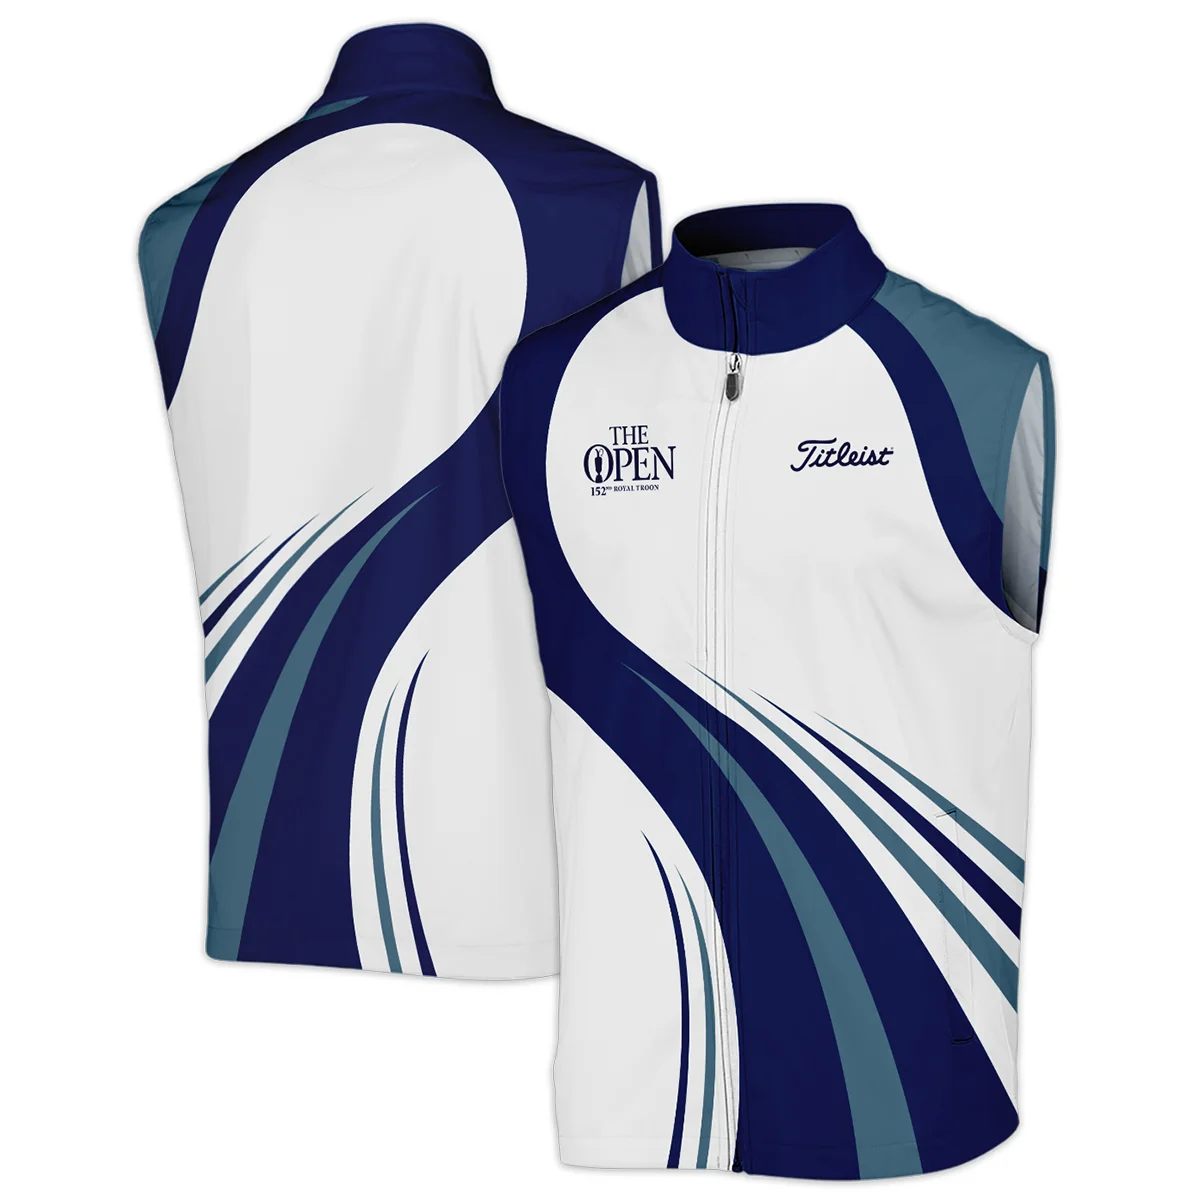 152nd Open Championship Titleist White Mostly Desaturated Dark Blue Sleeveless Jacket All Over Prints HOTOP270624A02TLSJK